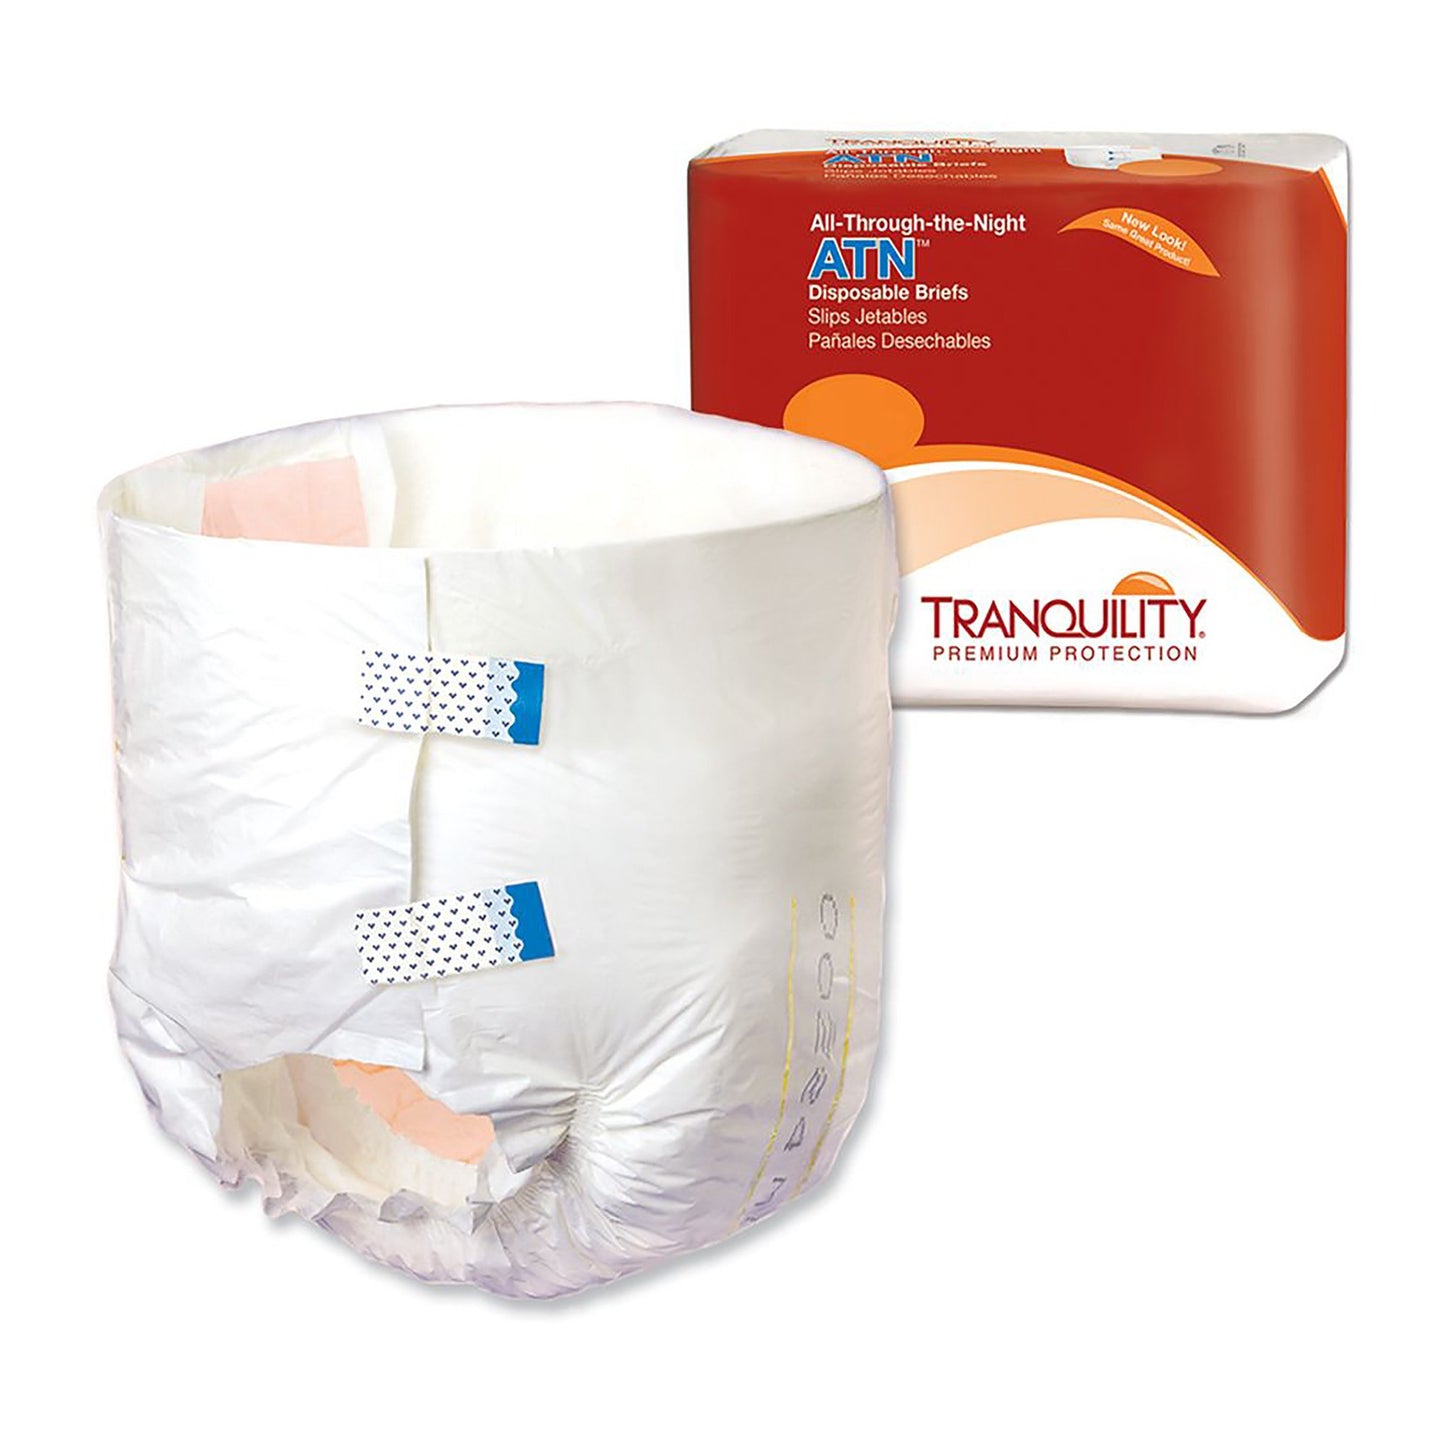 Tranquility® ATN Incontinence Brief, Large, 12 ct